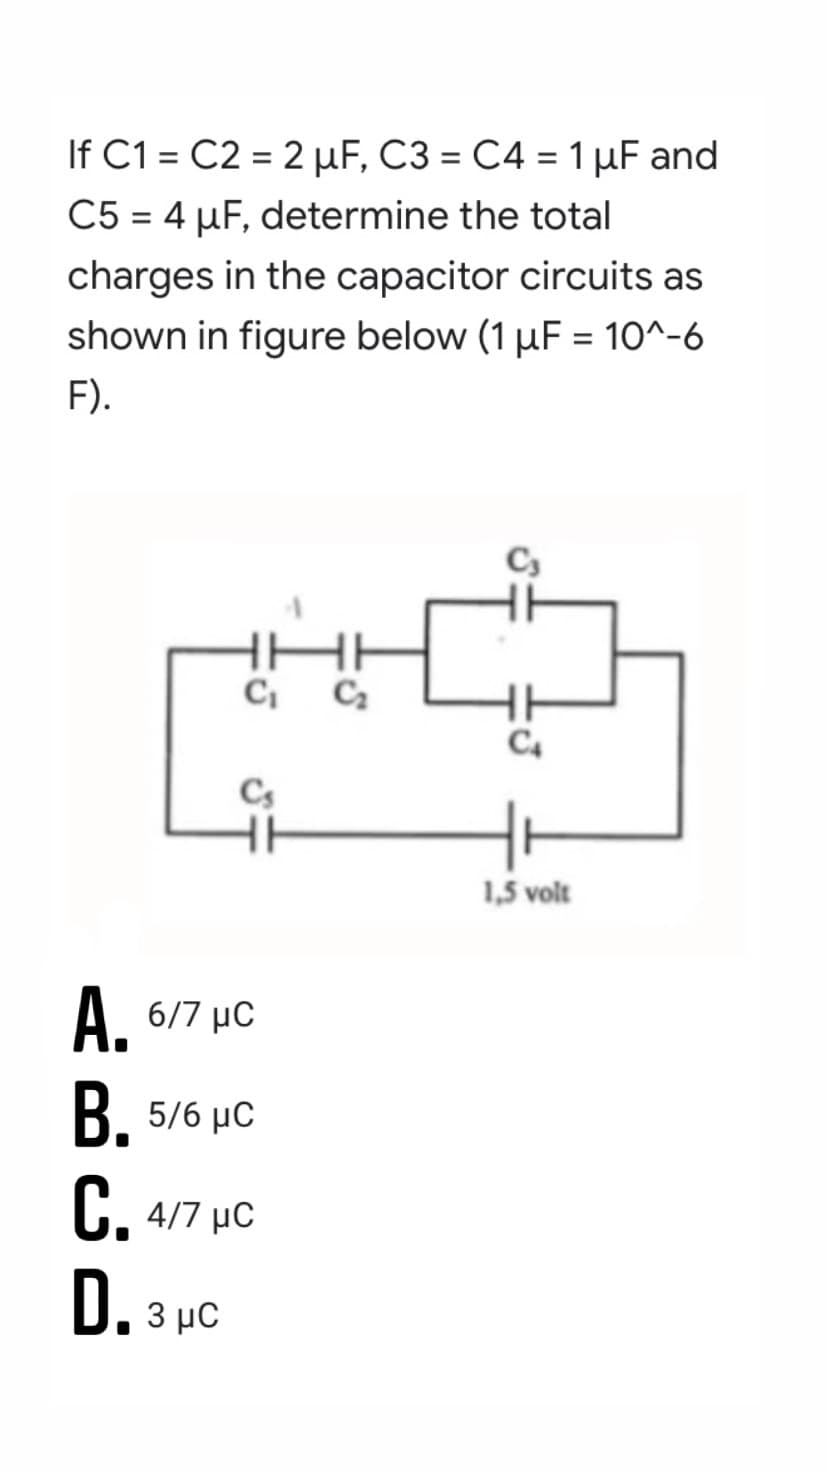 If C1 = C2 = 2 µF, C3 = C4 = 1 µF and
C5 = 4 µF, determine the total
%3D
charges in the capacitor circuits as
shown in figure below (1 µF = 10^-6
%3D
F).
C4
Cs
1,5 volt
A. 6/7 µC
B. 5/6 µc
C. 4/7 µC
D. 3 pc
